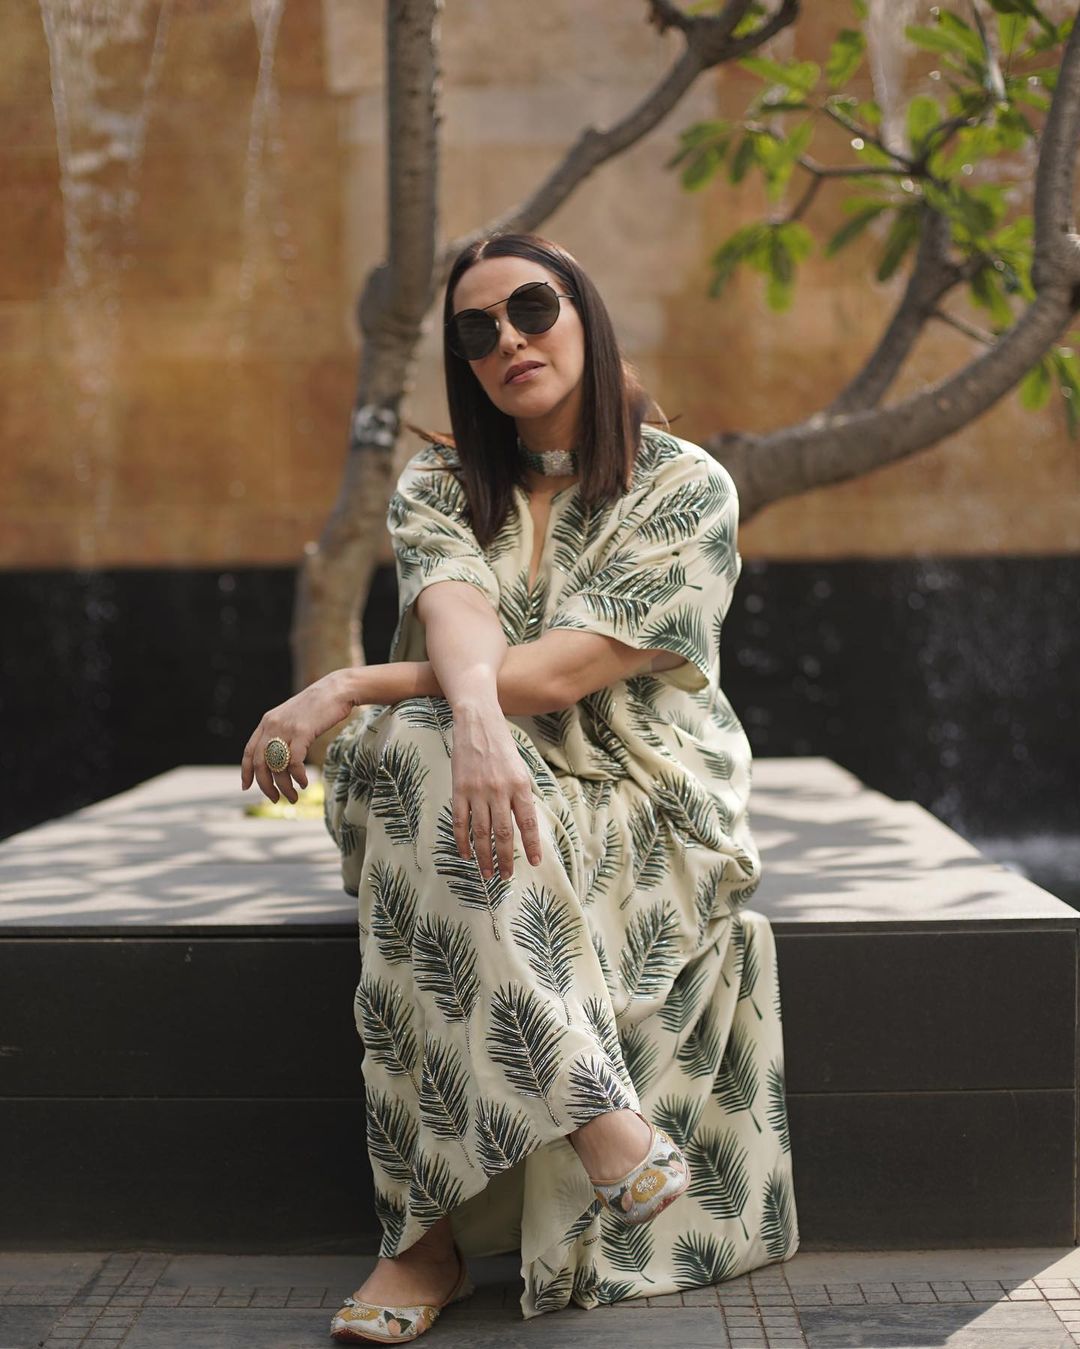 Neha is seen all comfortable in this quirky kaftan while she posed for the camera